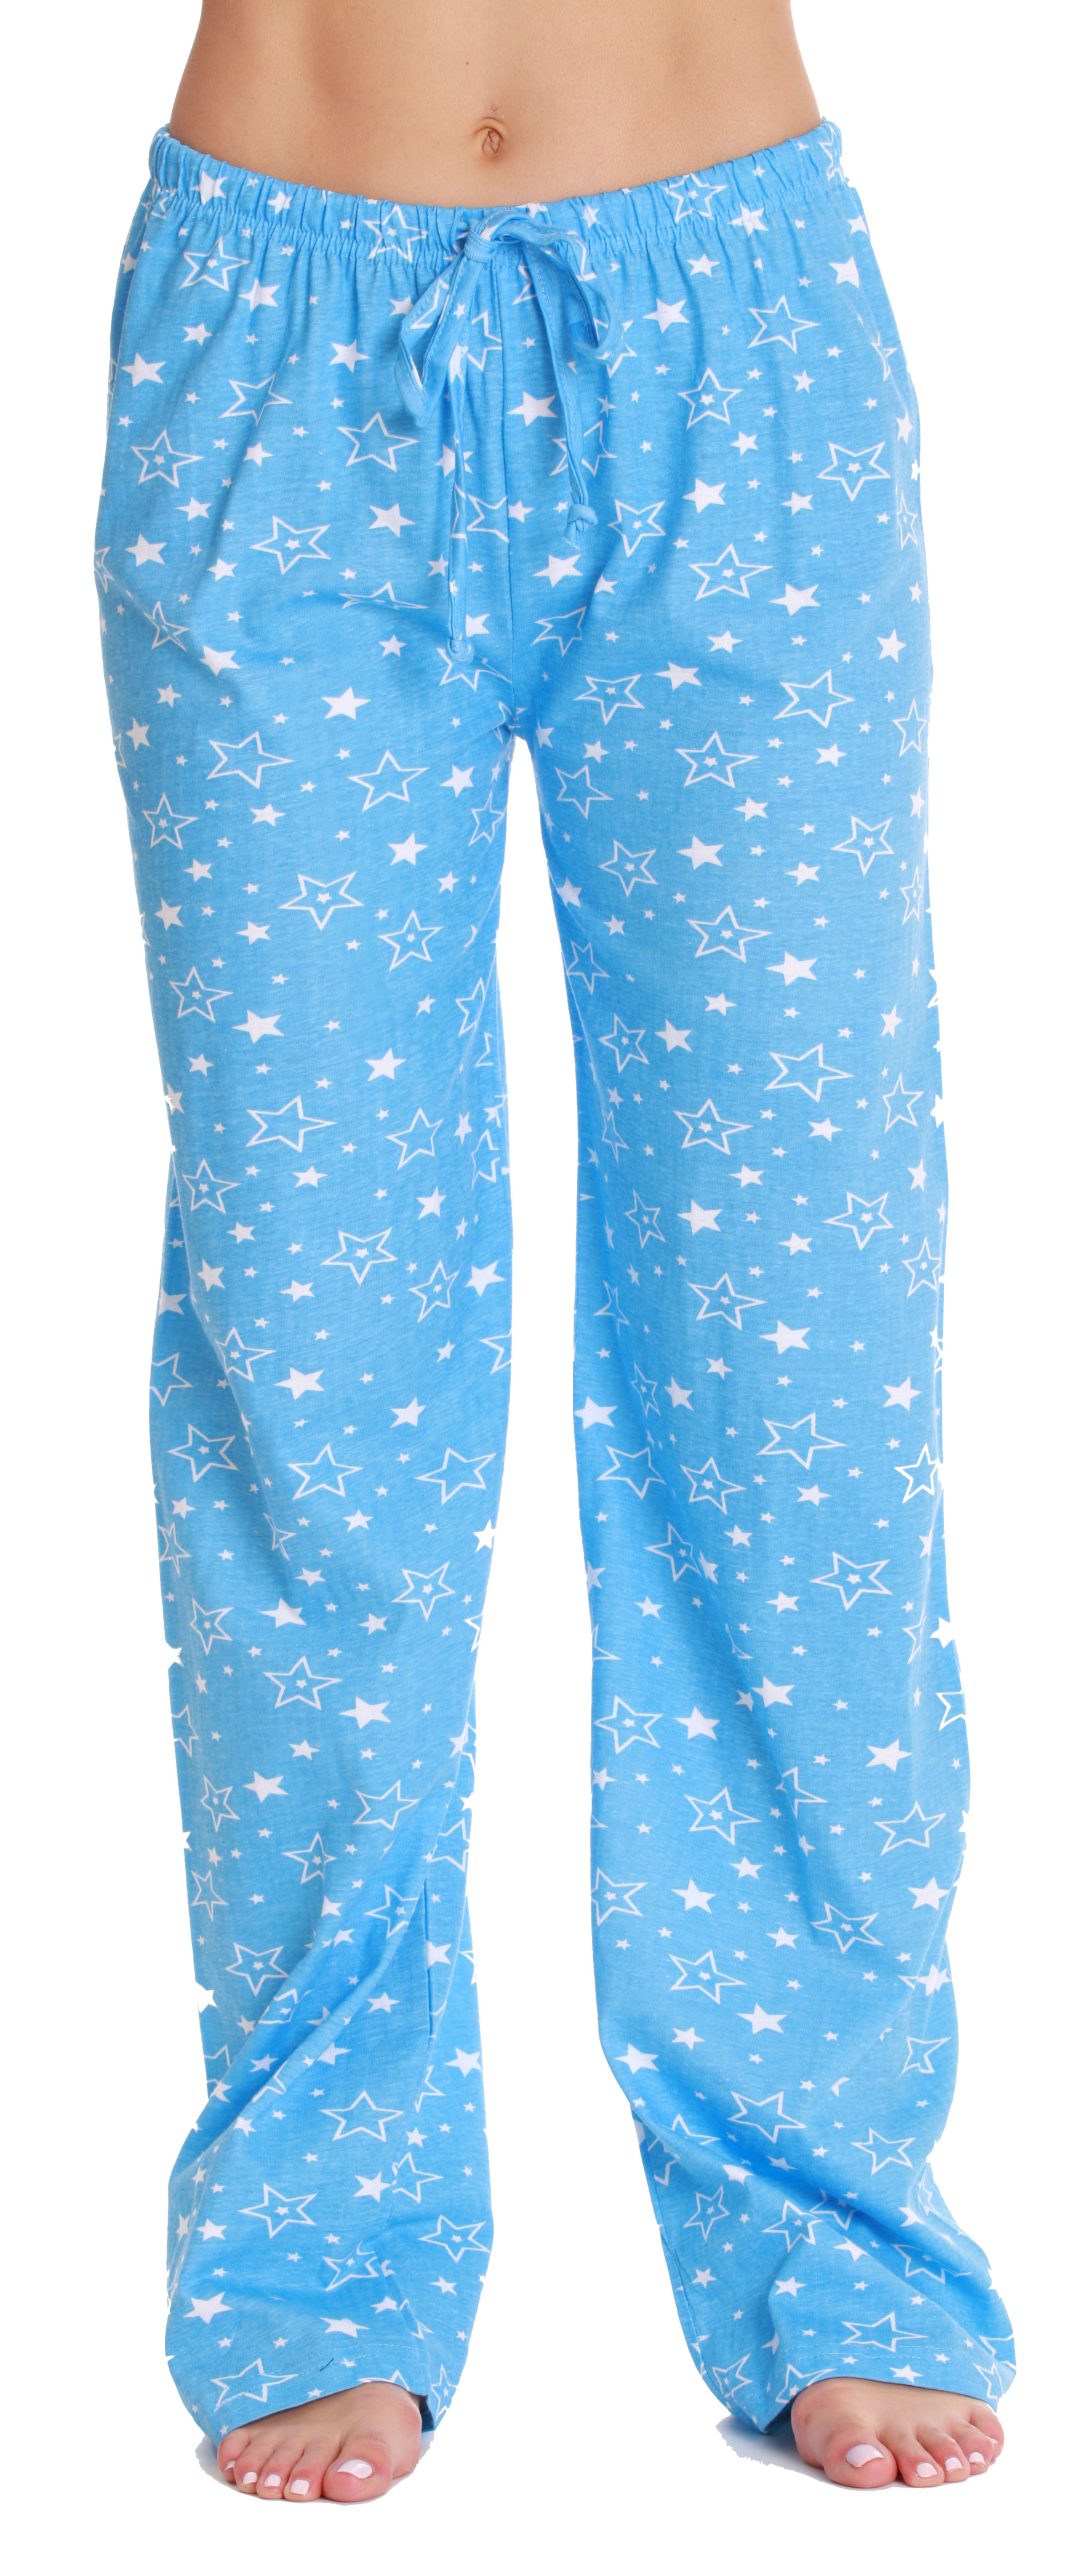 Night pants for women: Comfort and Style缩略图